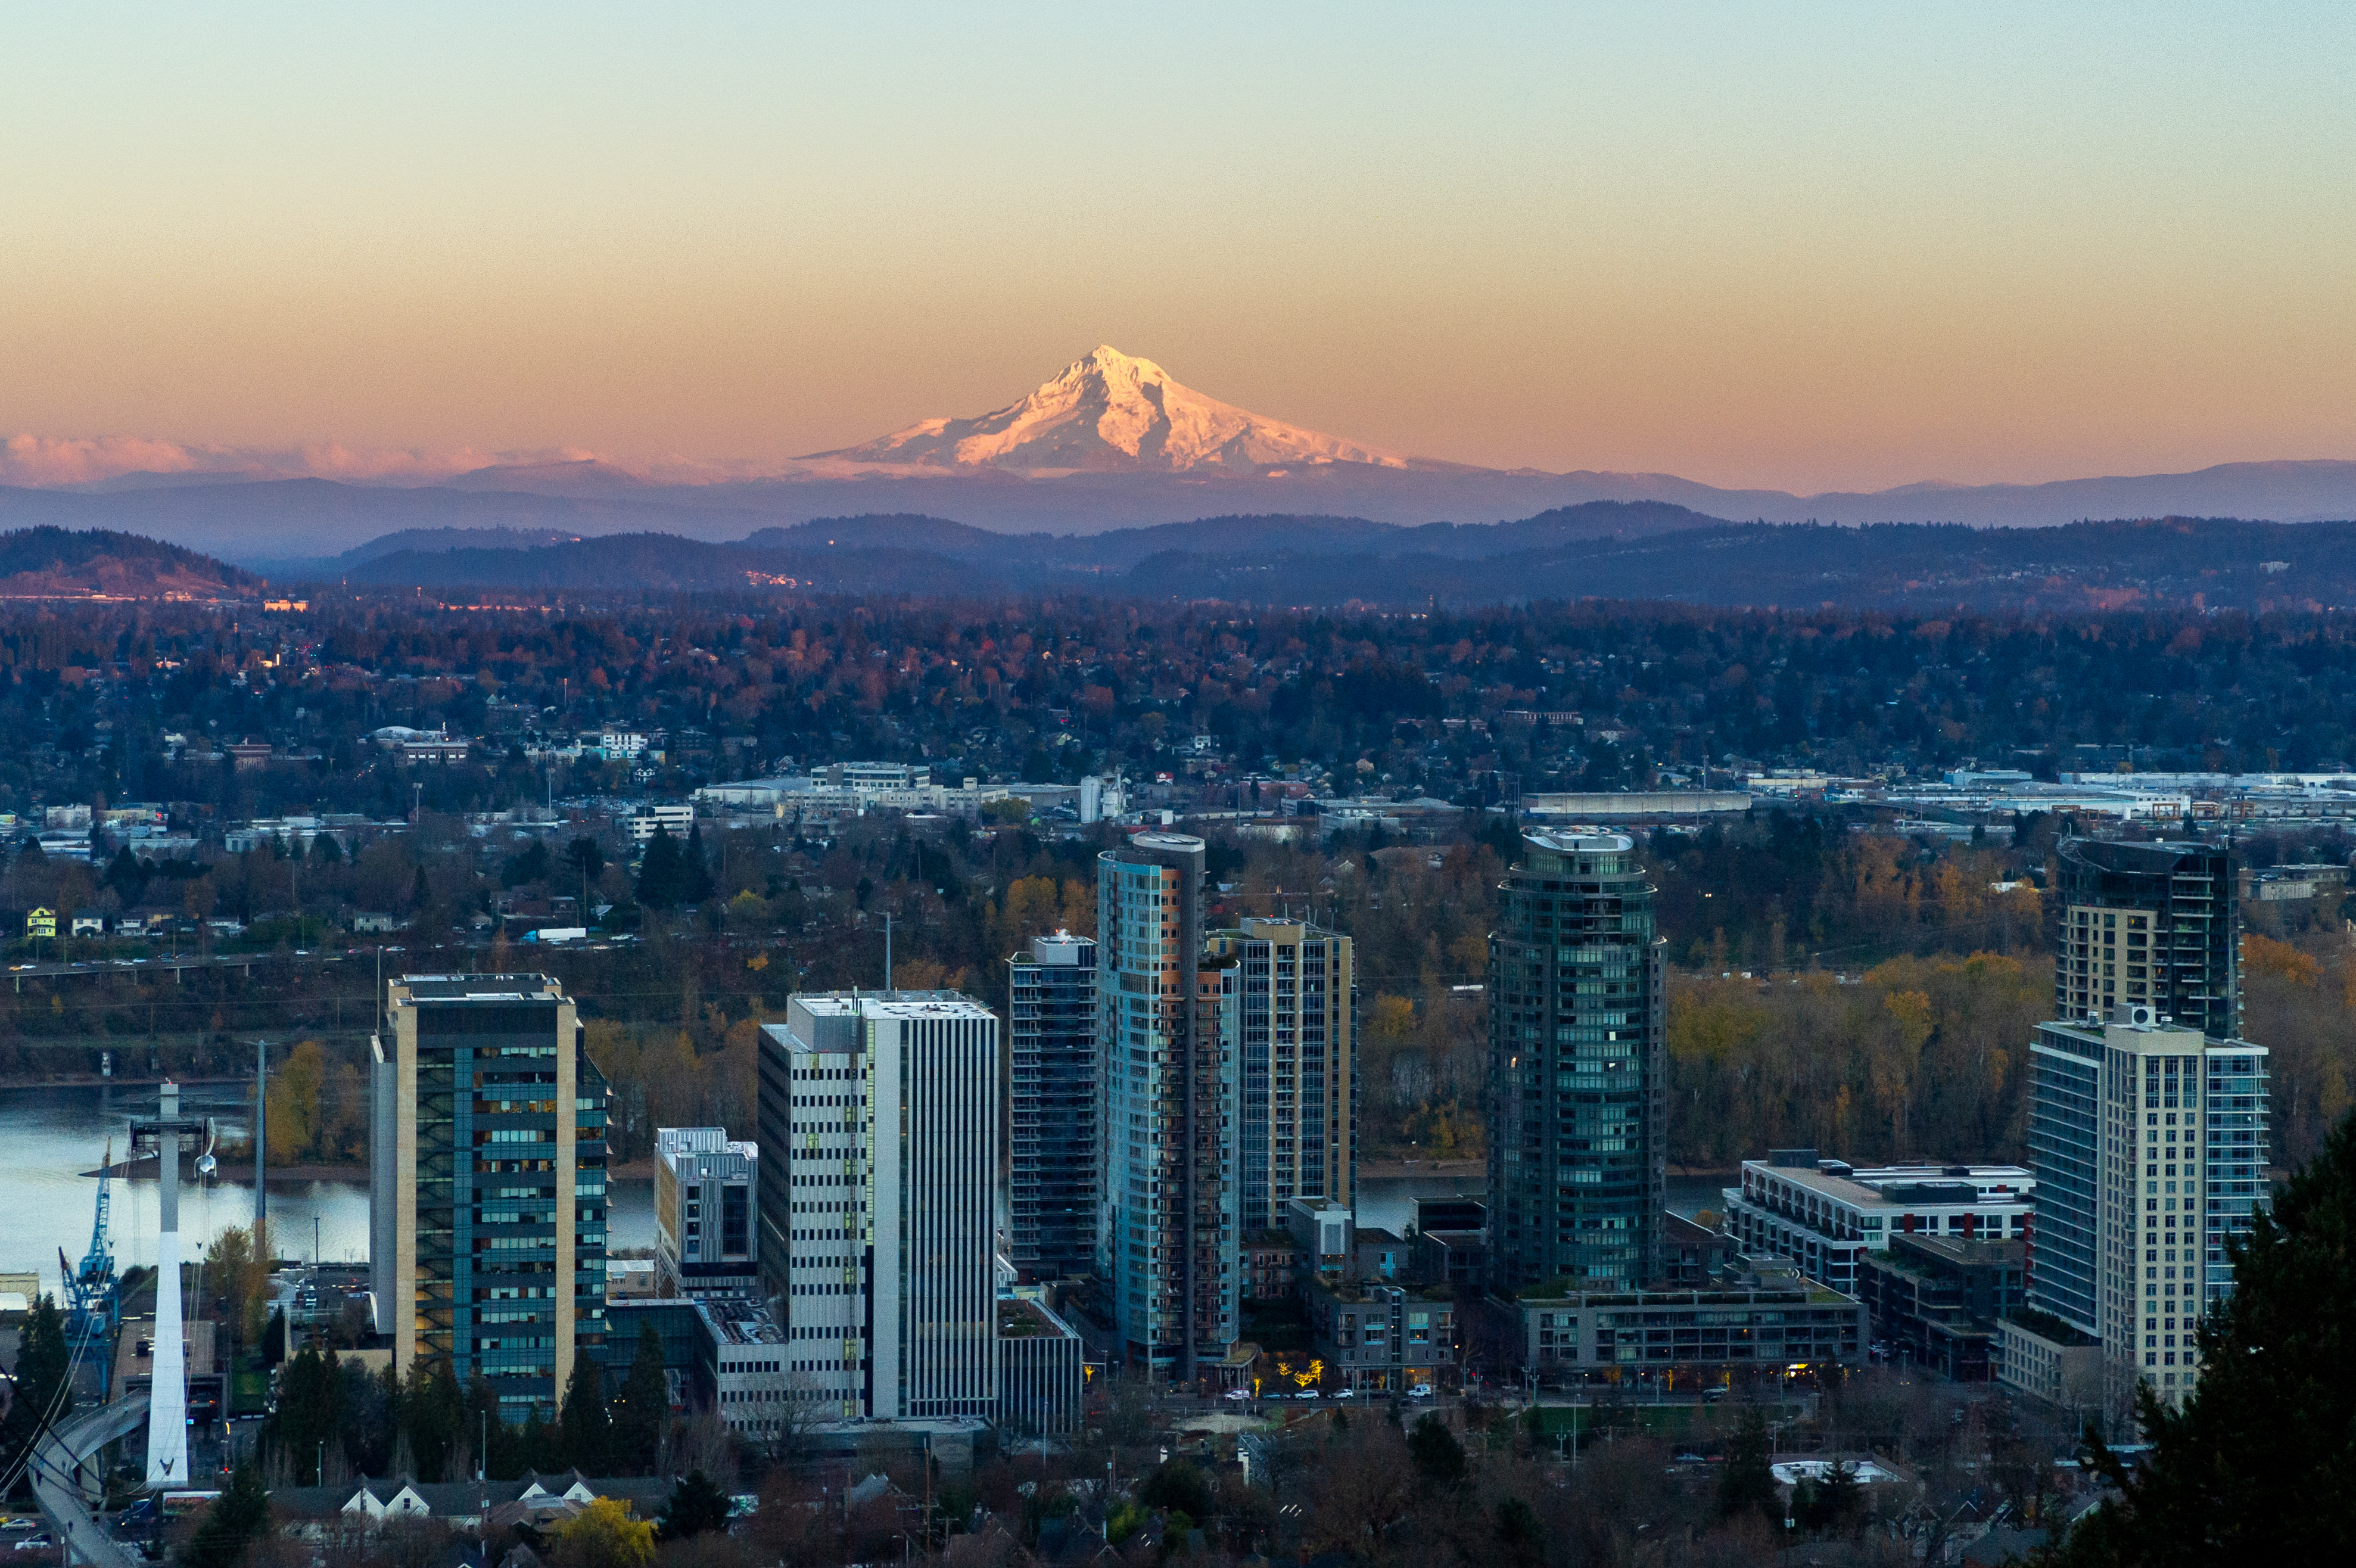 View of Mount Hood from downtown